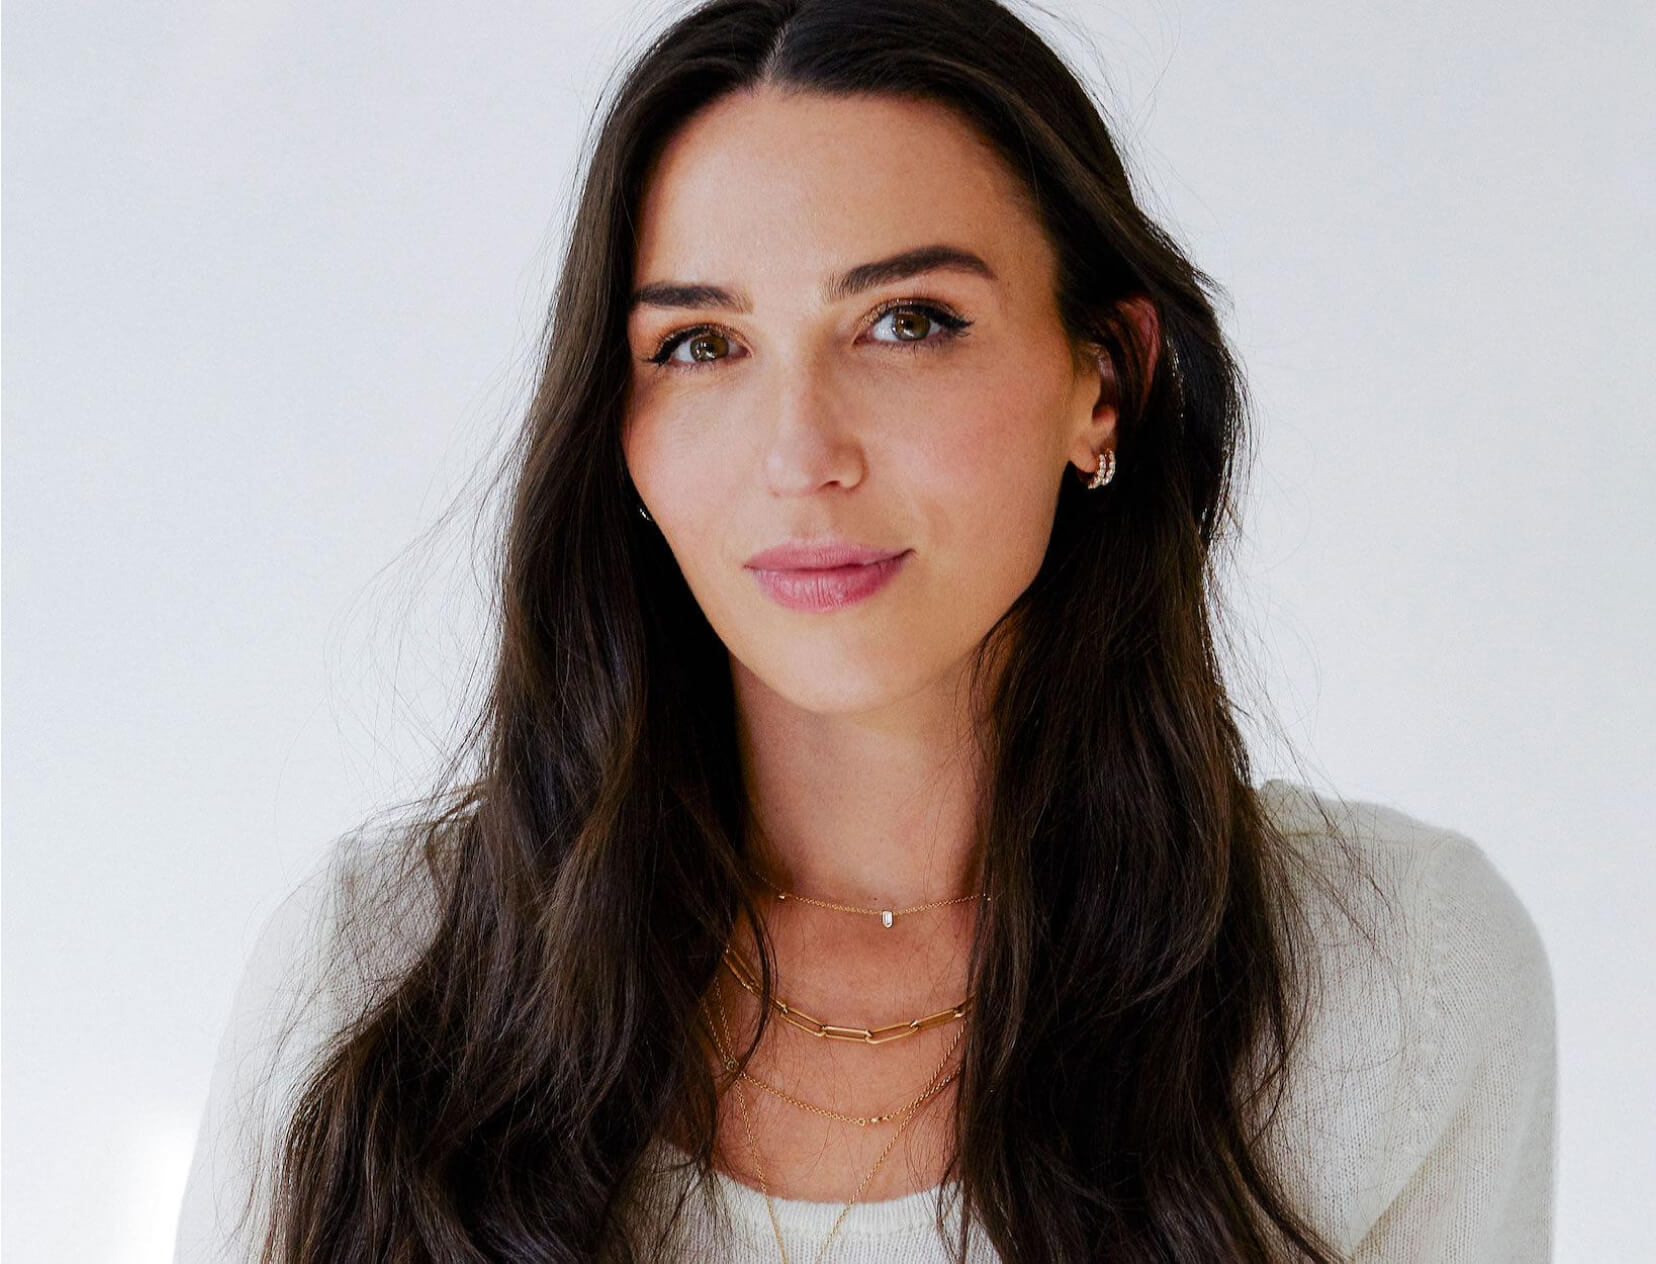 Saie Beauty CEO Laney Crowell on How Simple Makeup Is the Biggest Statement